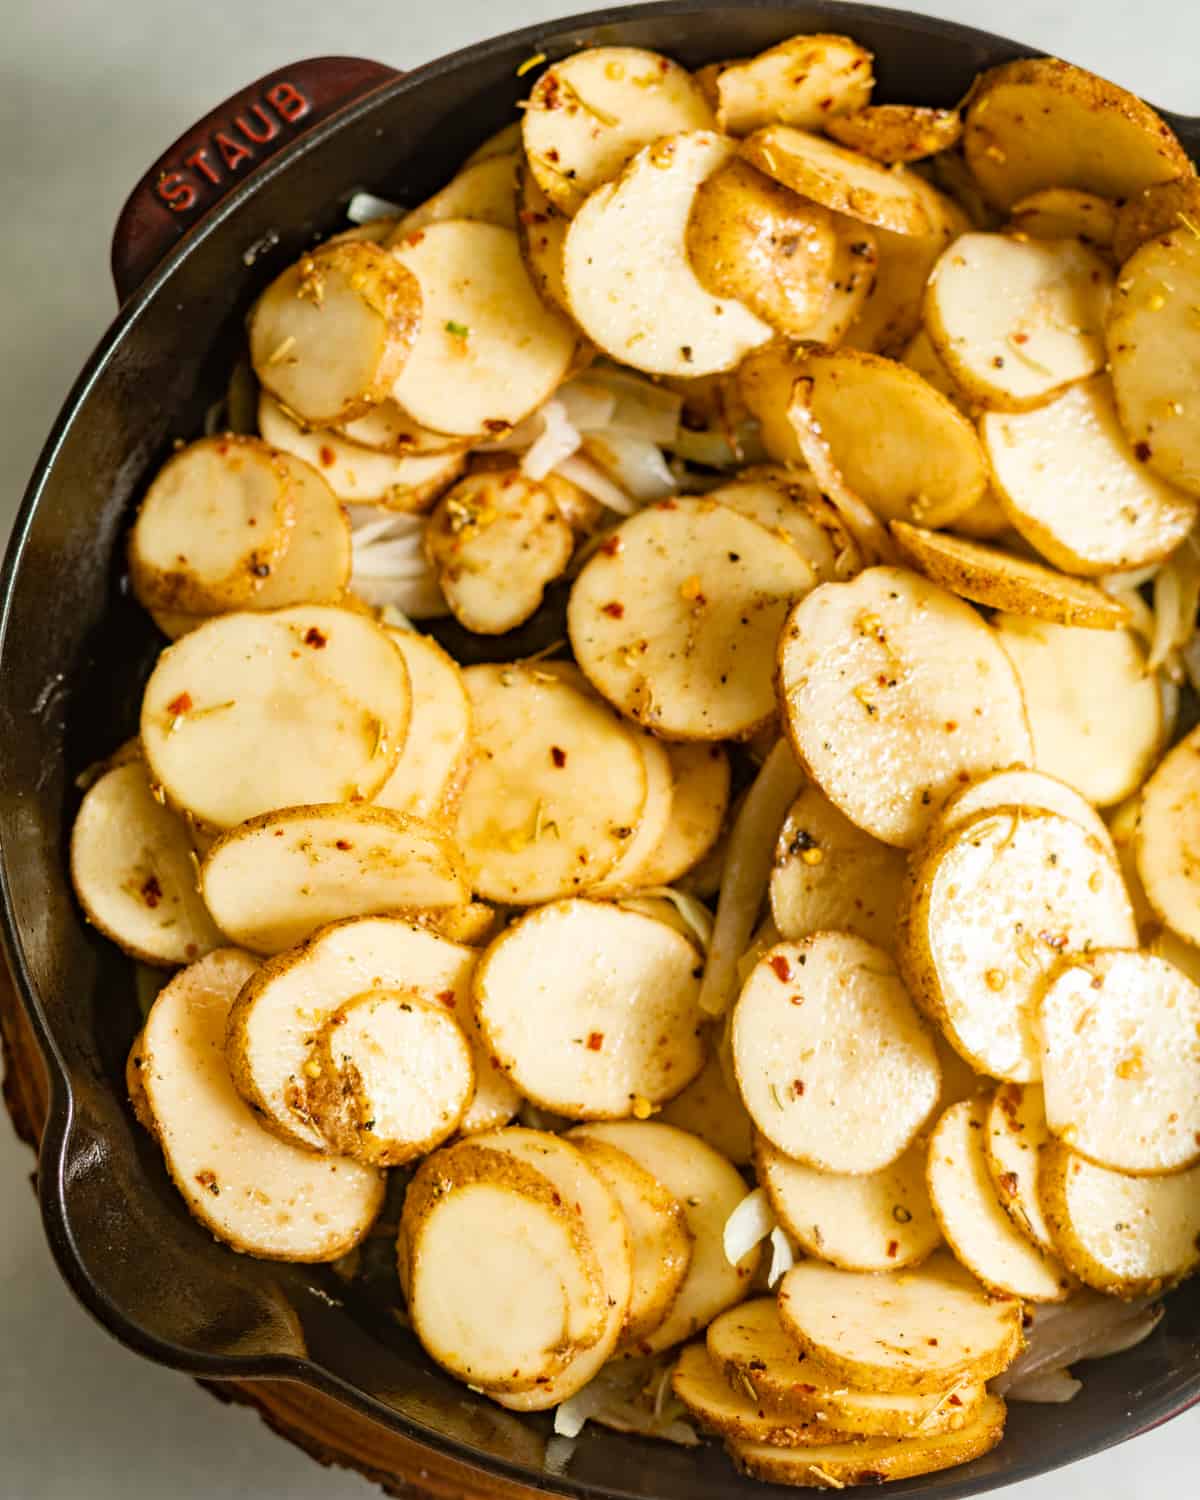 Sliced potatoes with seasonings placed in a cast iron skillet.